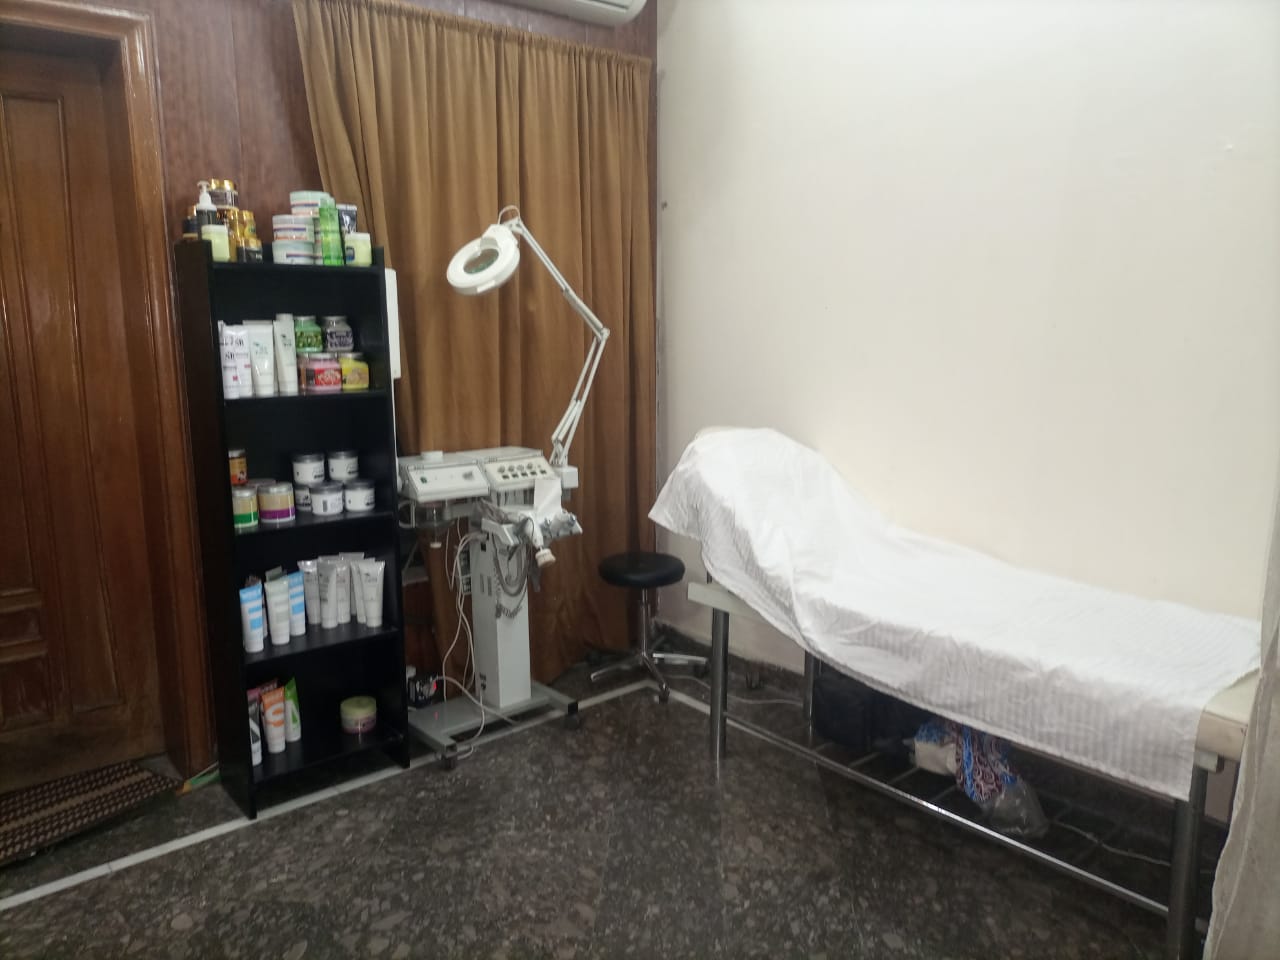 Neutrogena Whitening / Acne Facial with Hi Frequency + Full Arms Wax & Full Wax OR Whitening Manicure & Whitening Pedicure with Polisher + Threading (Eye brow+Upper lips) by Mirrors Beauty Lounge, Wapda town, Lahore.